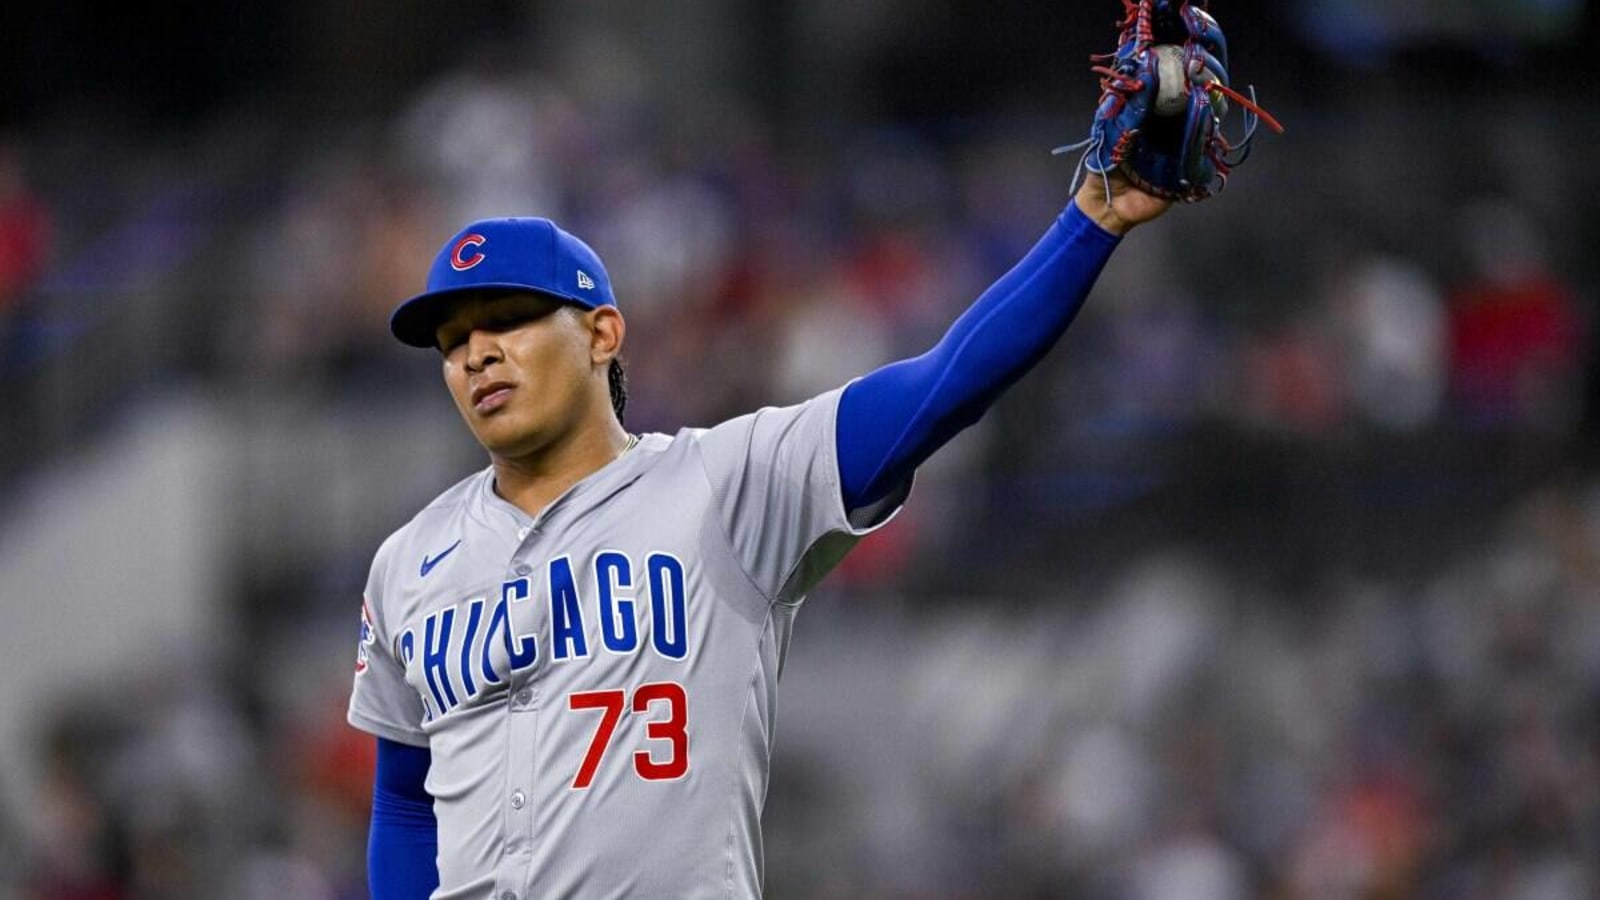 Cubs Injury Update: Adbert Alzolay to IL with Forearm Strain